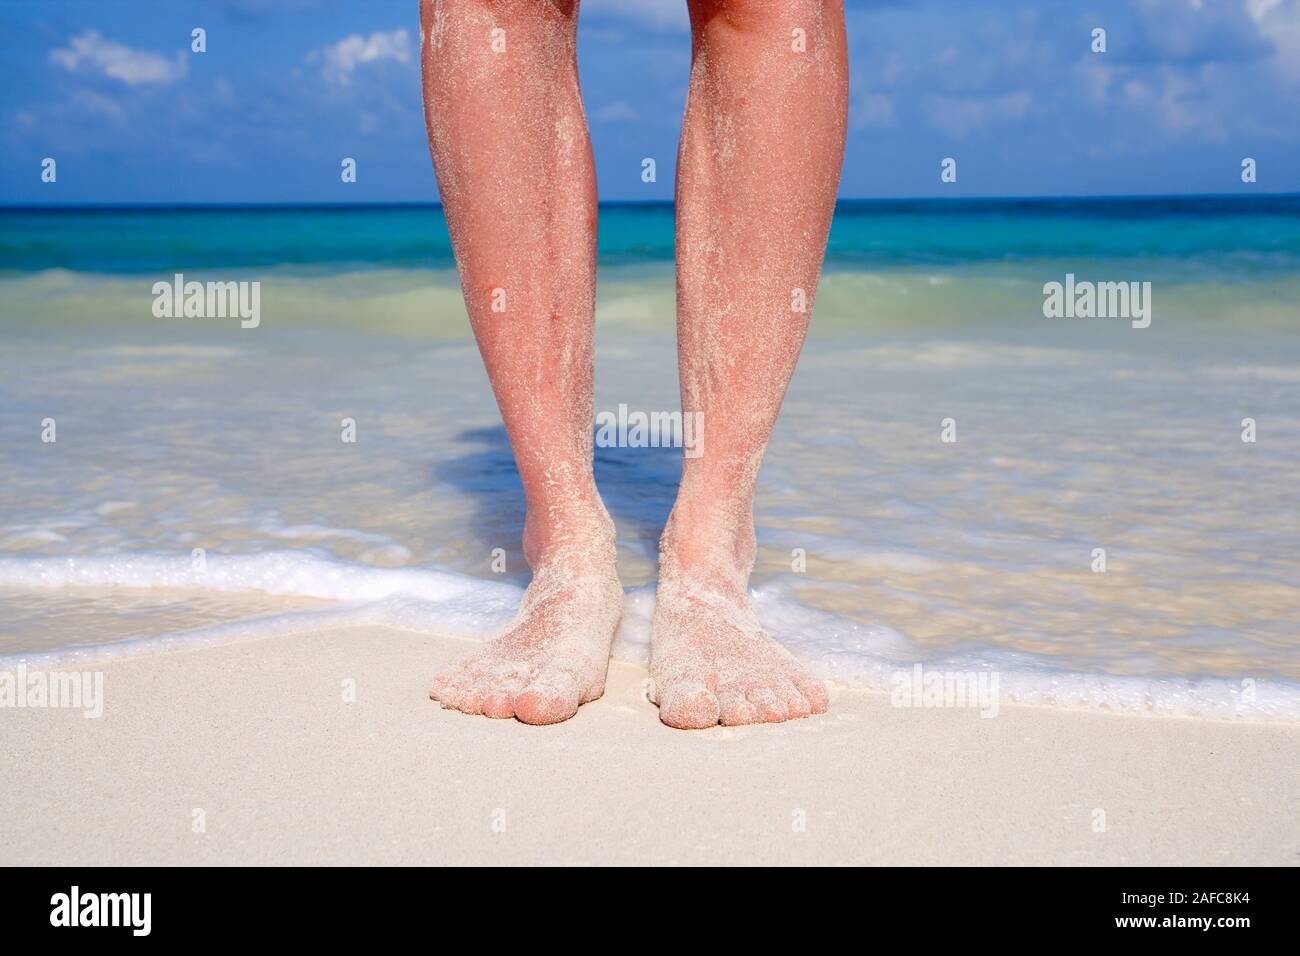 Womans feet covered with sand on tropical beach in Playa del Carmen, Mexico Model Released Photo Stock Photo